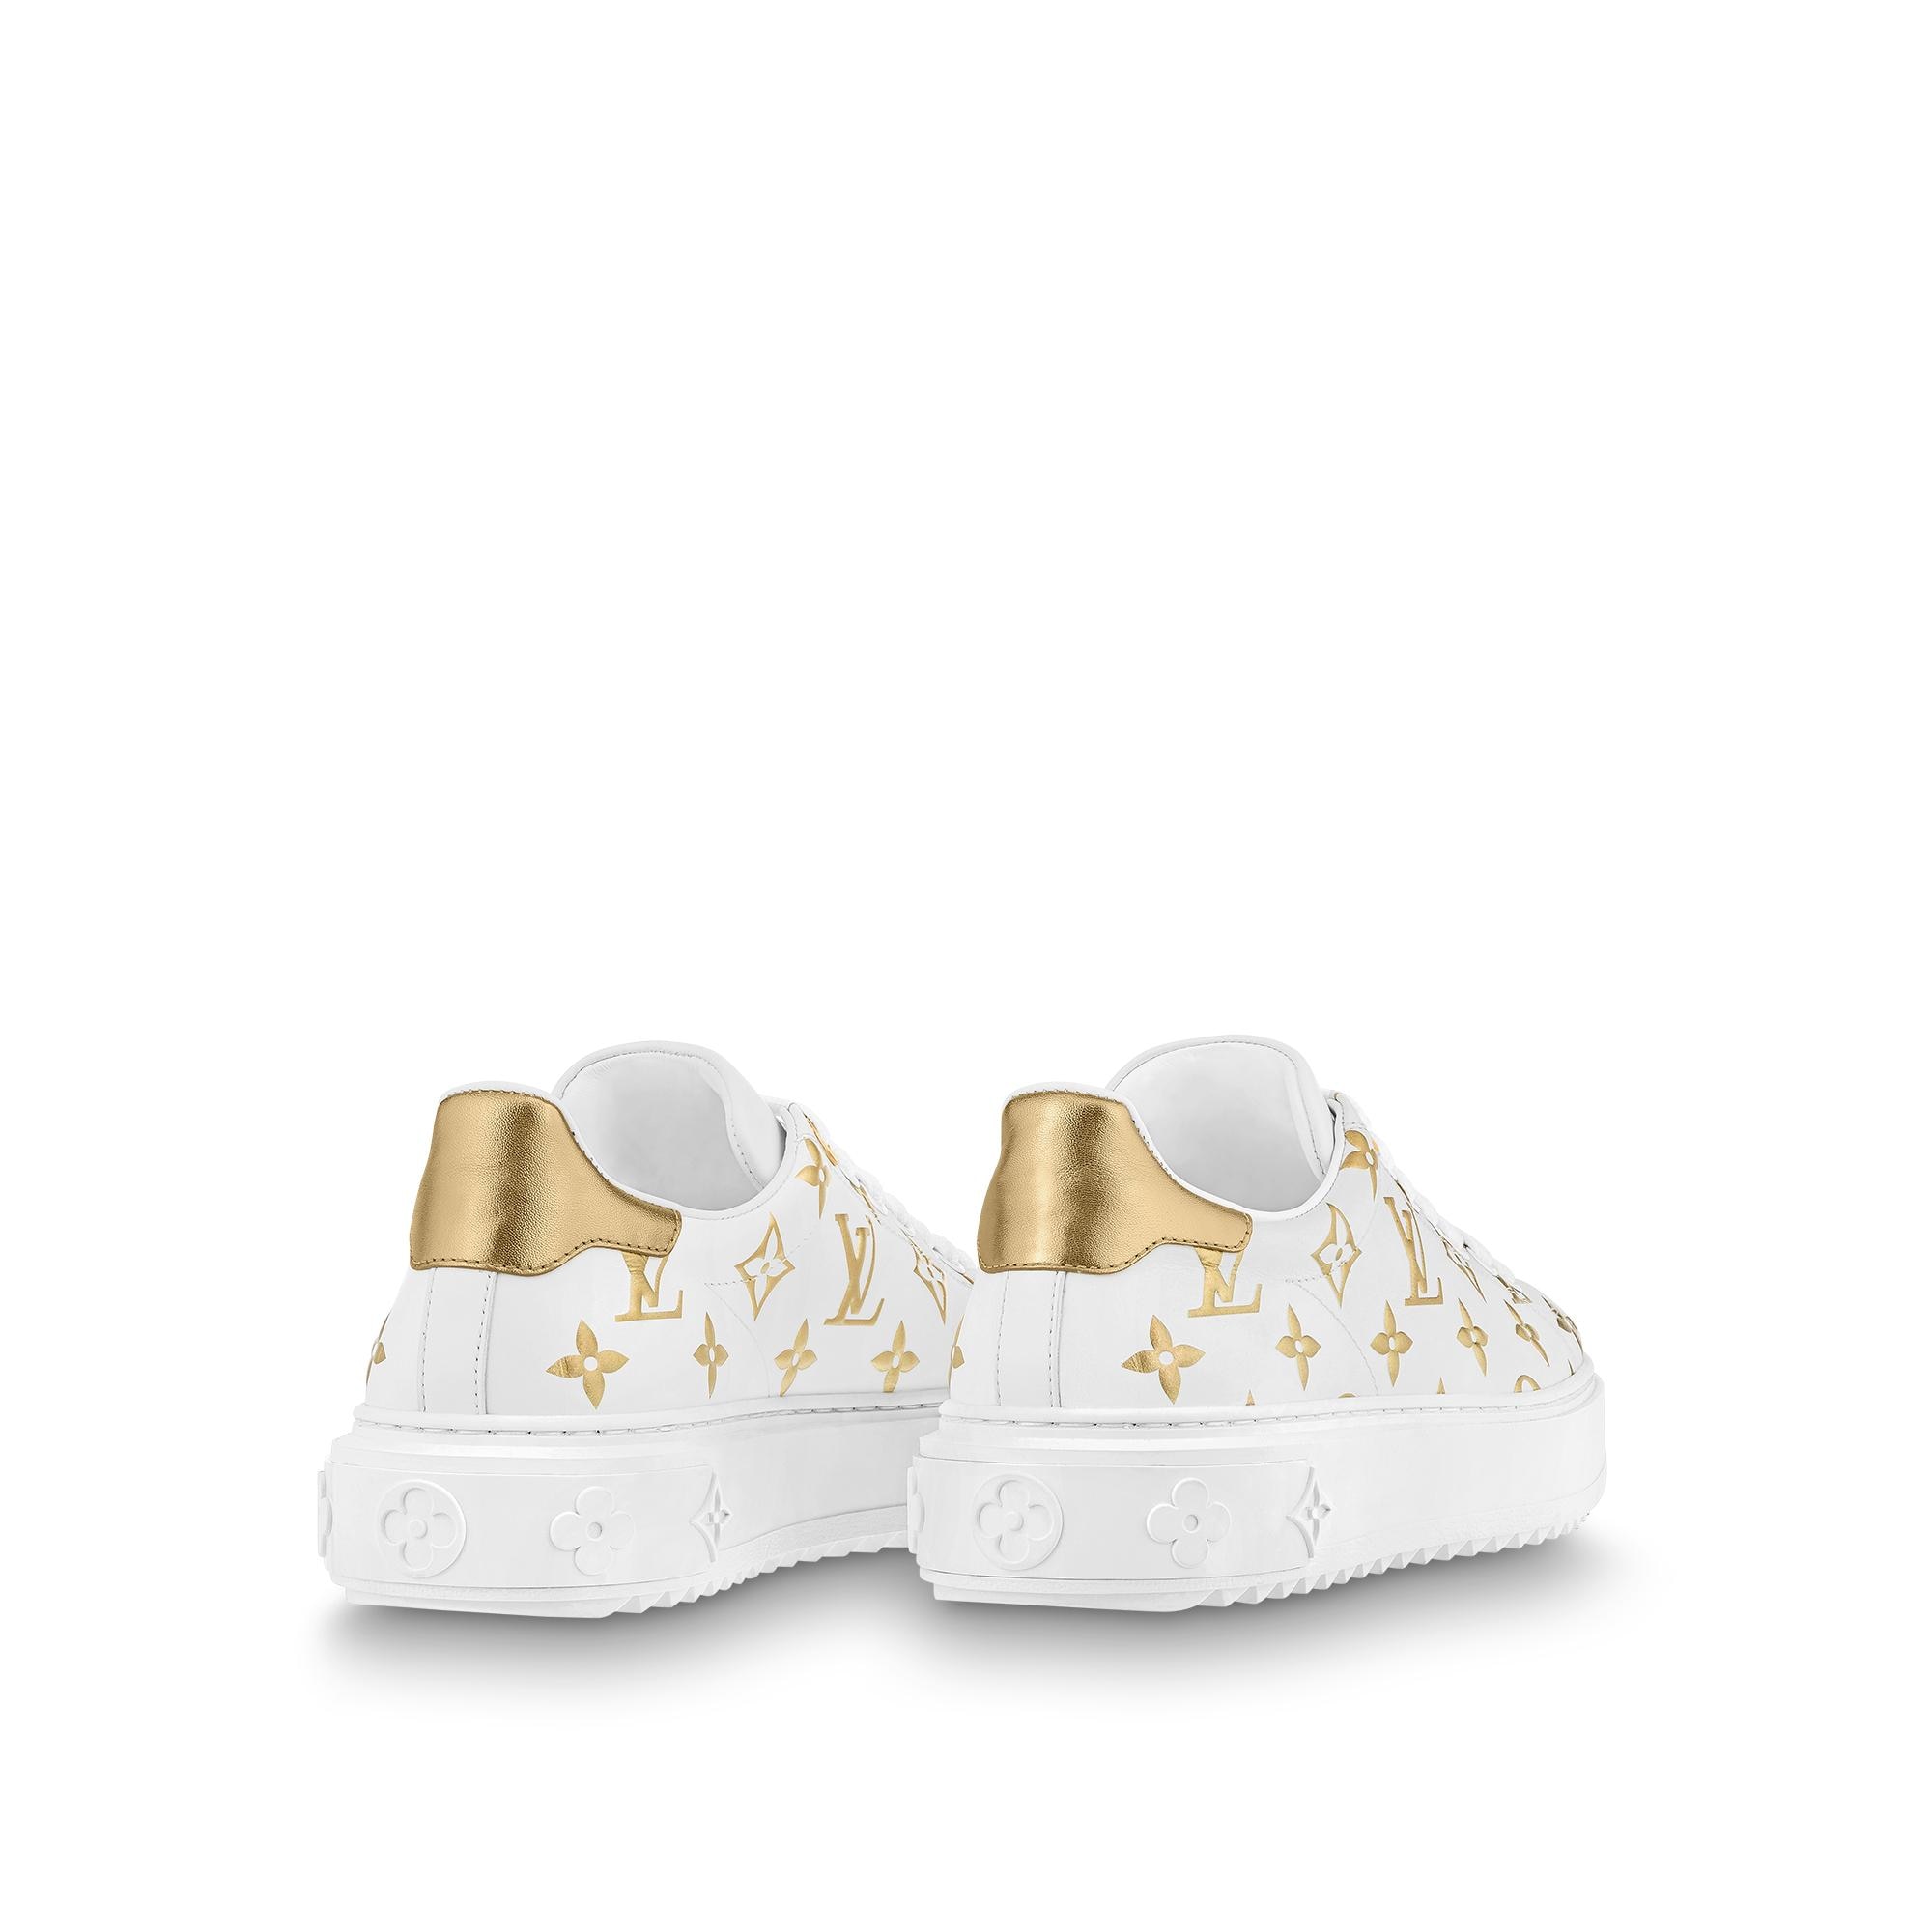 Louis Vuitton 1AAW2S Time Out Sneaker